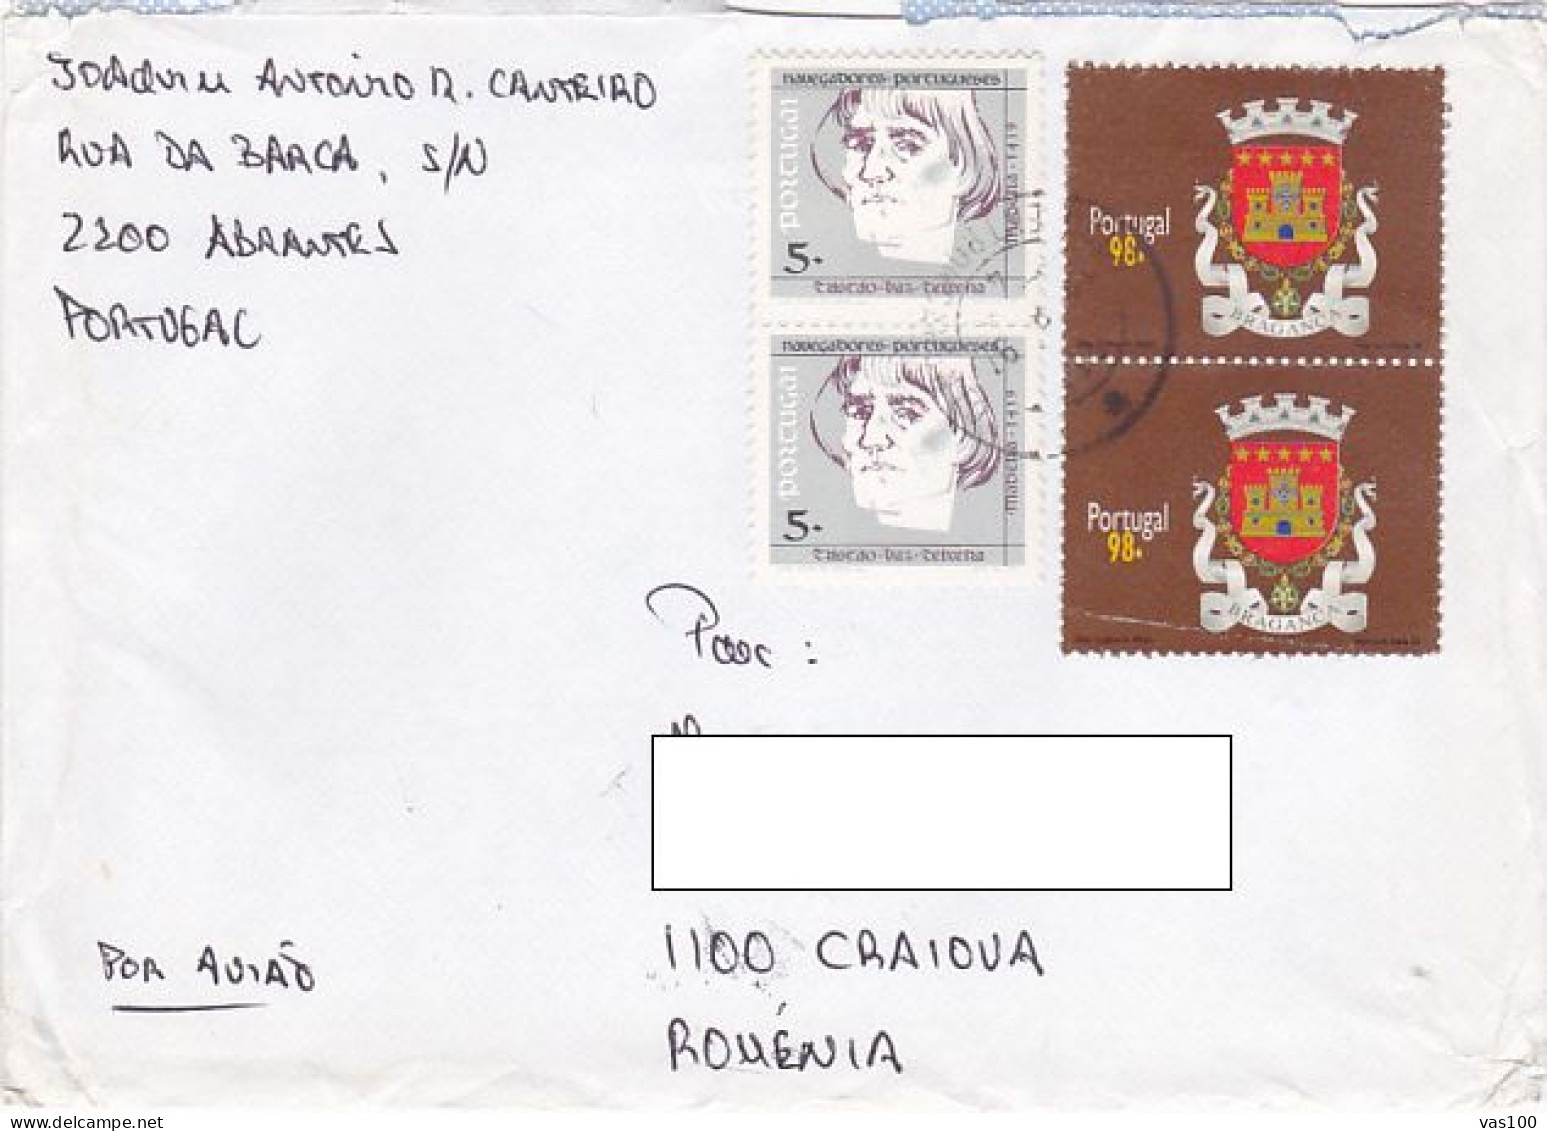 NAVIGATORS- TRISTAO VAZ TEIXEIRA, COAT OF ARMS, STAMPS ON COVER, 1997, PORTUGAL - Covers & Documents